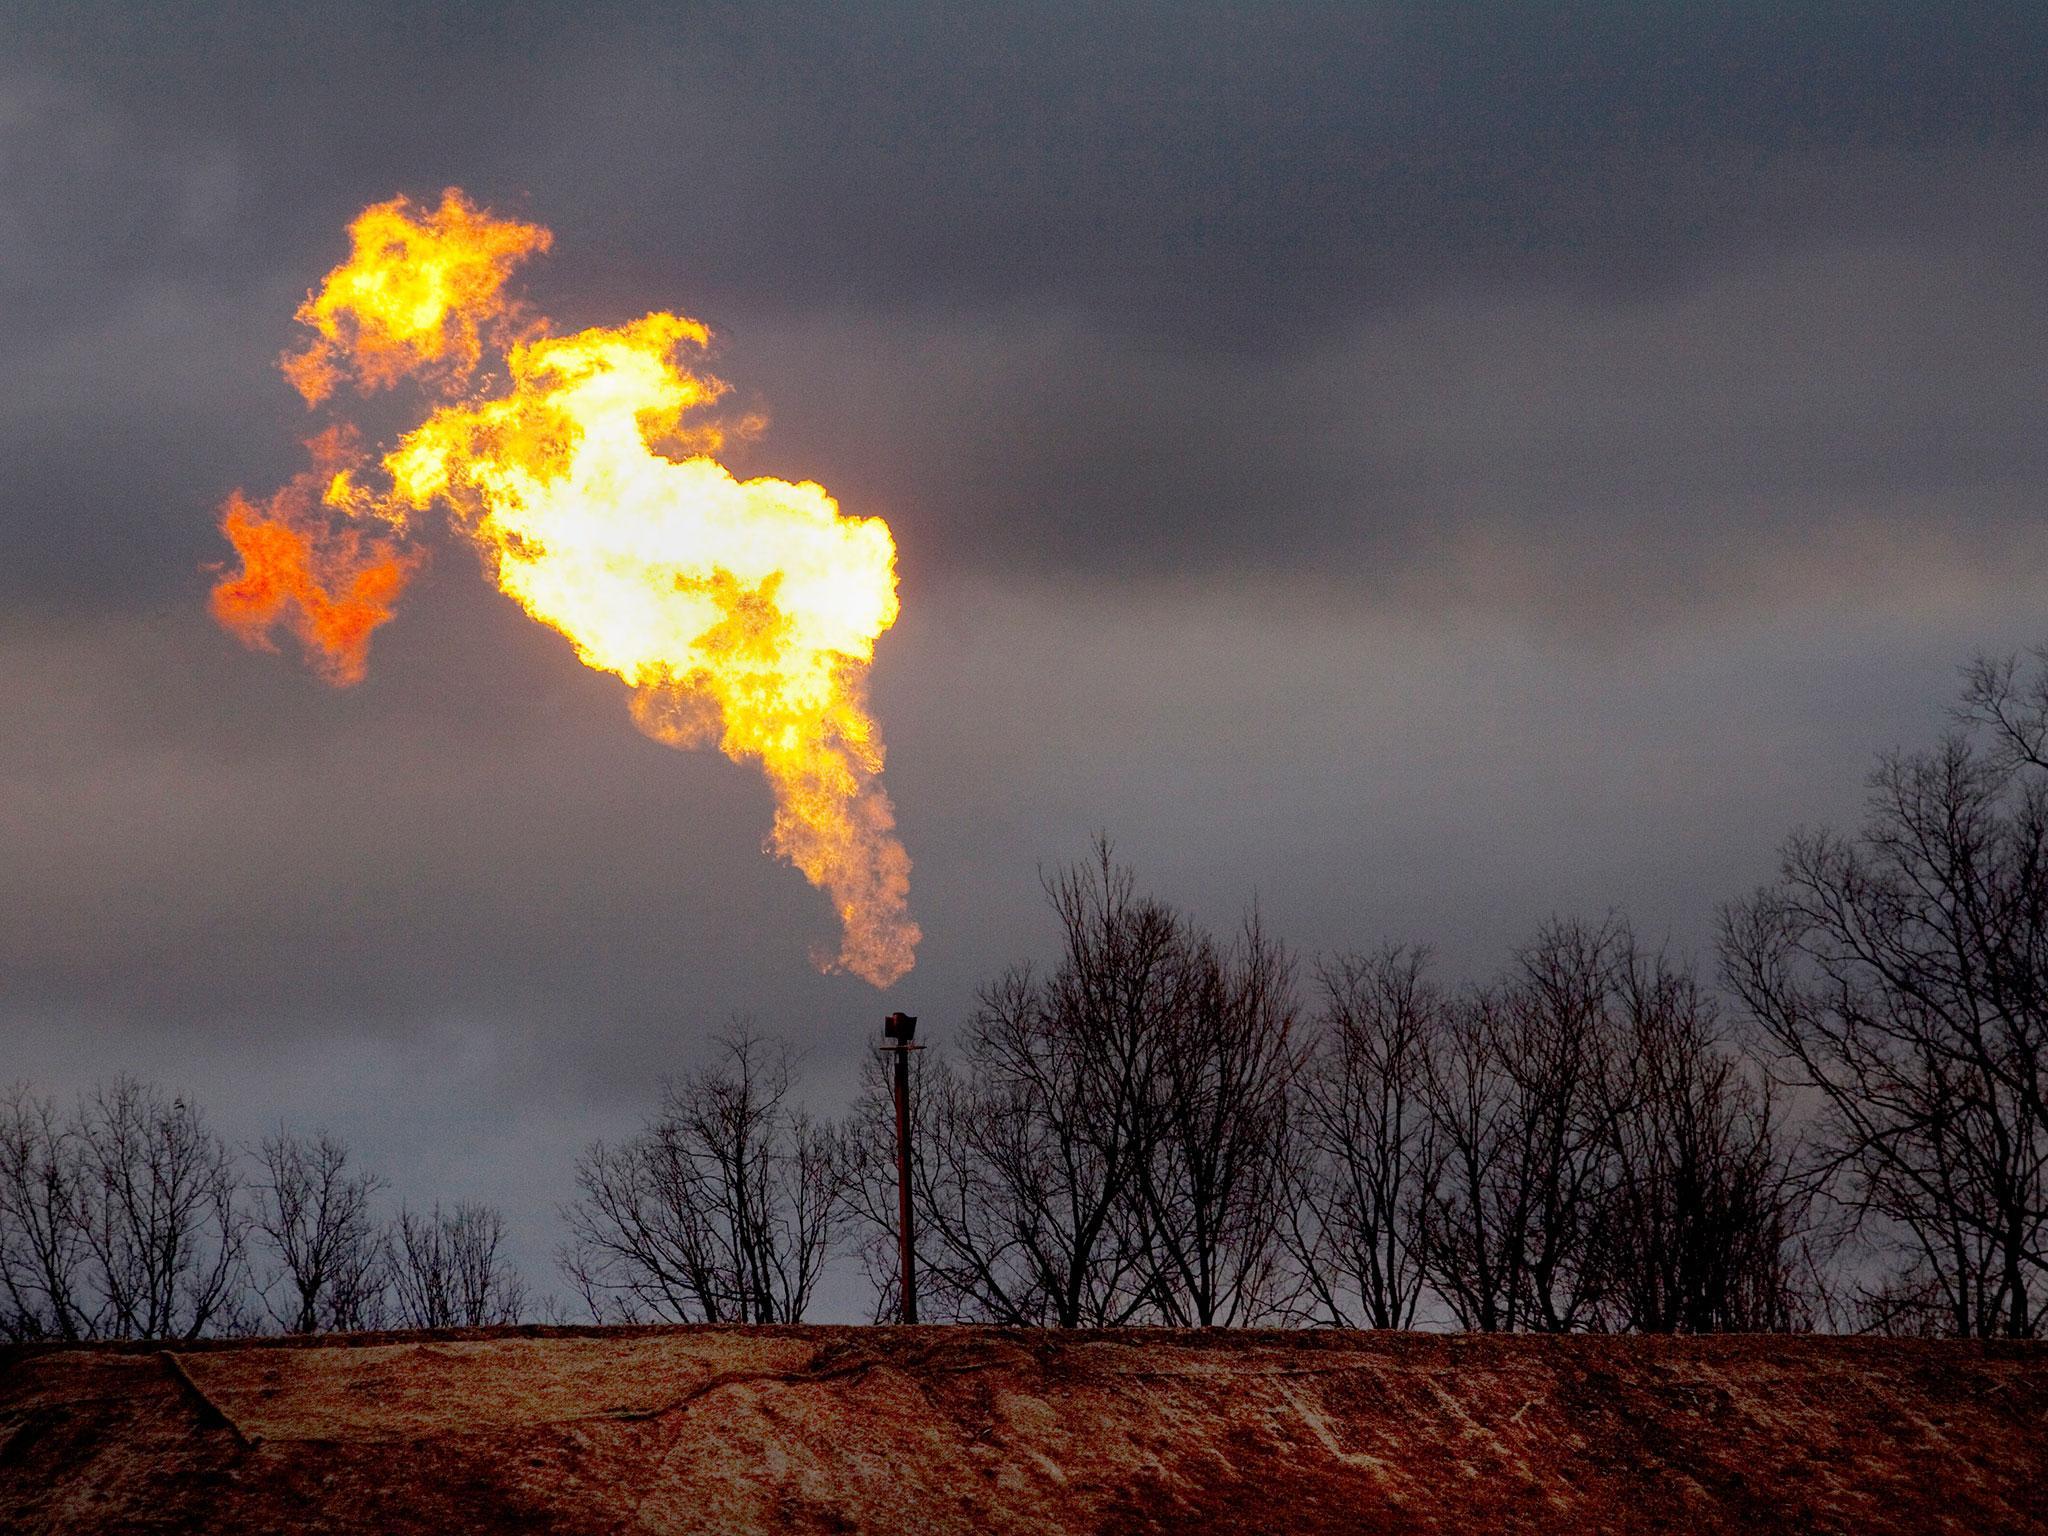 A gas flare burns at a fracking site in rural Pennsylvania